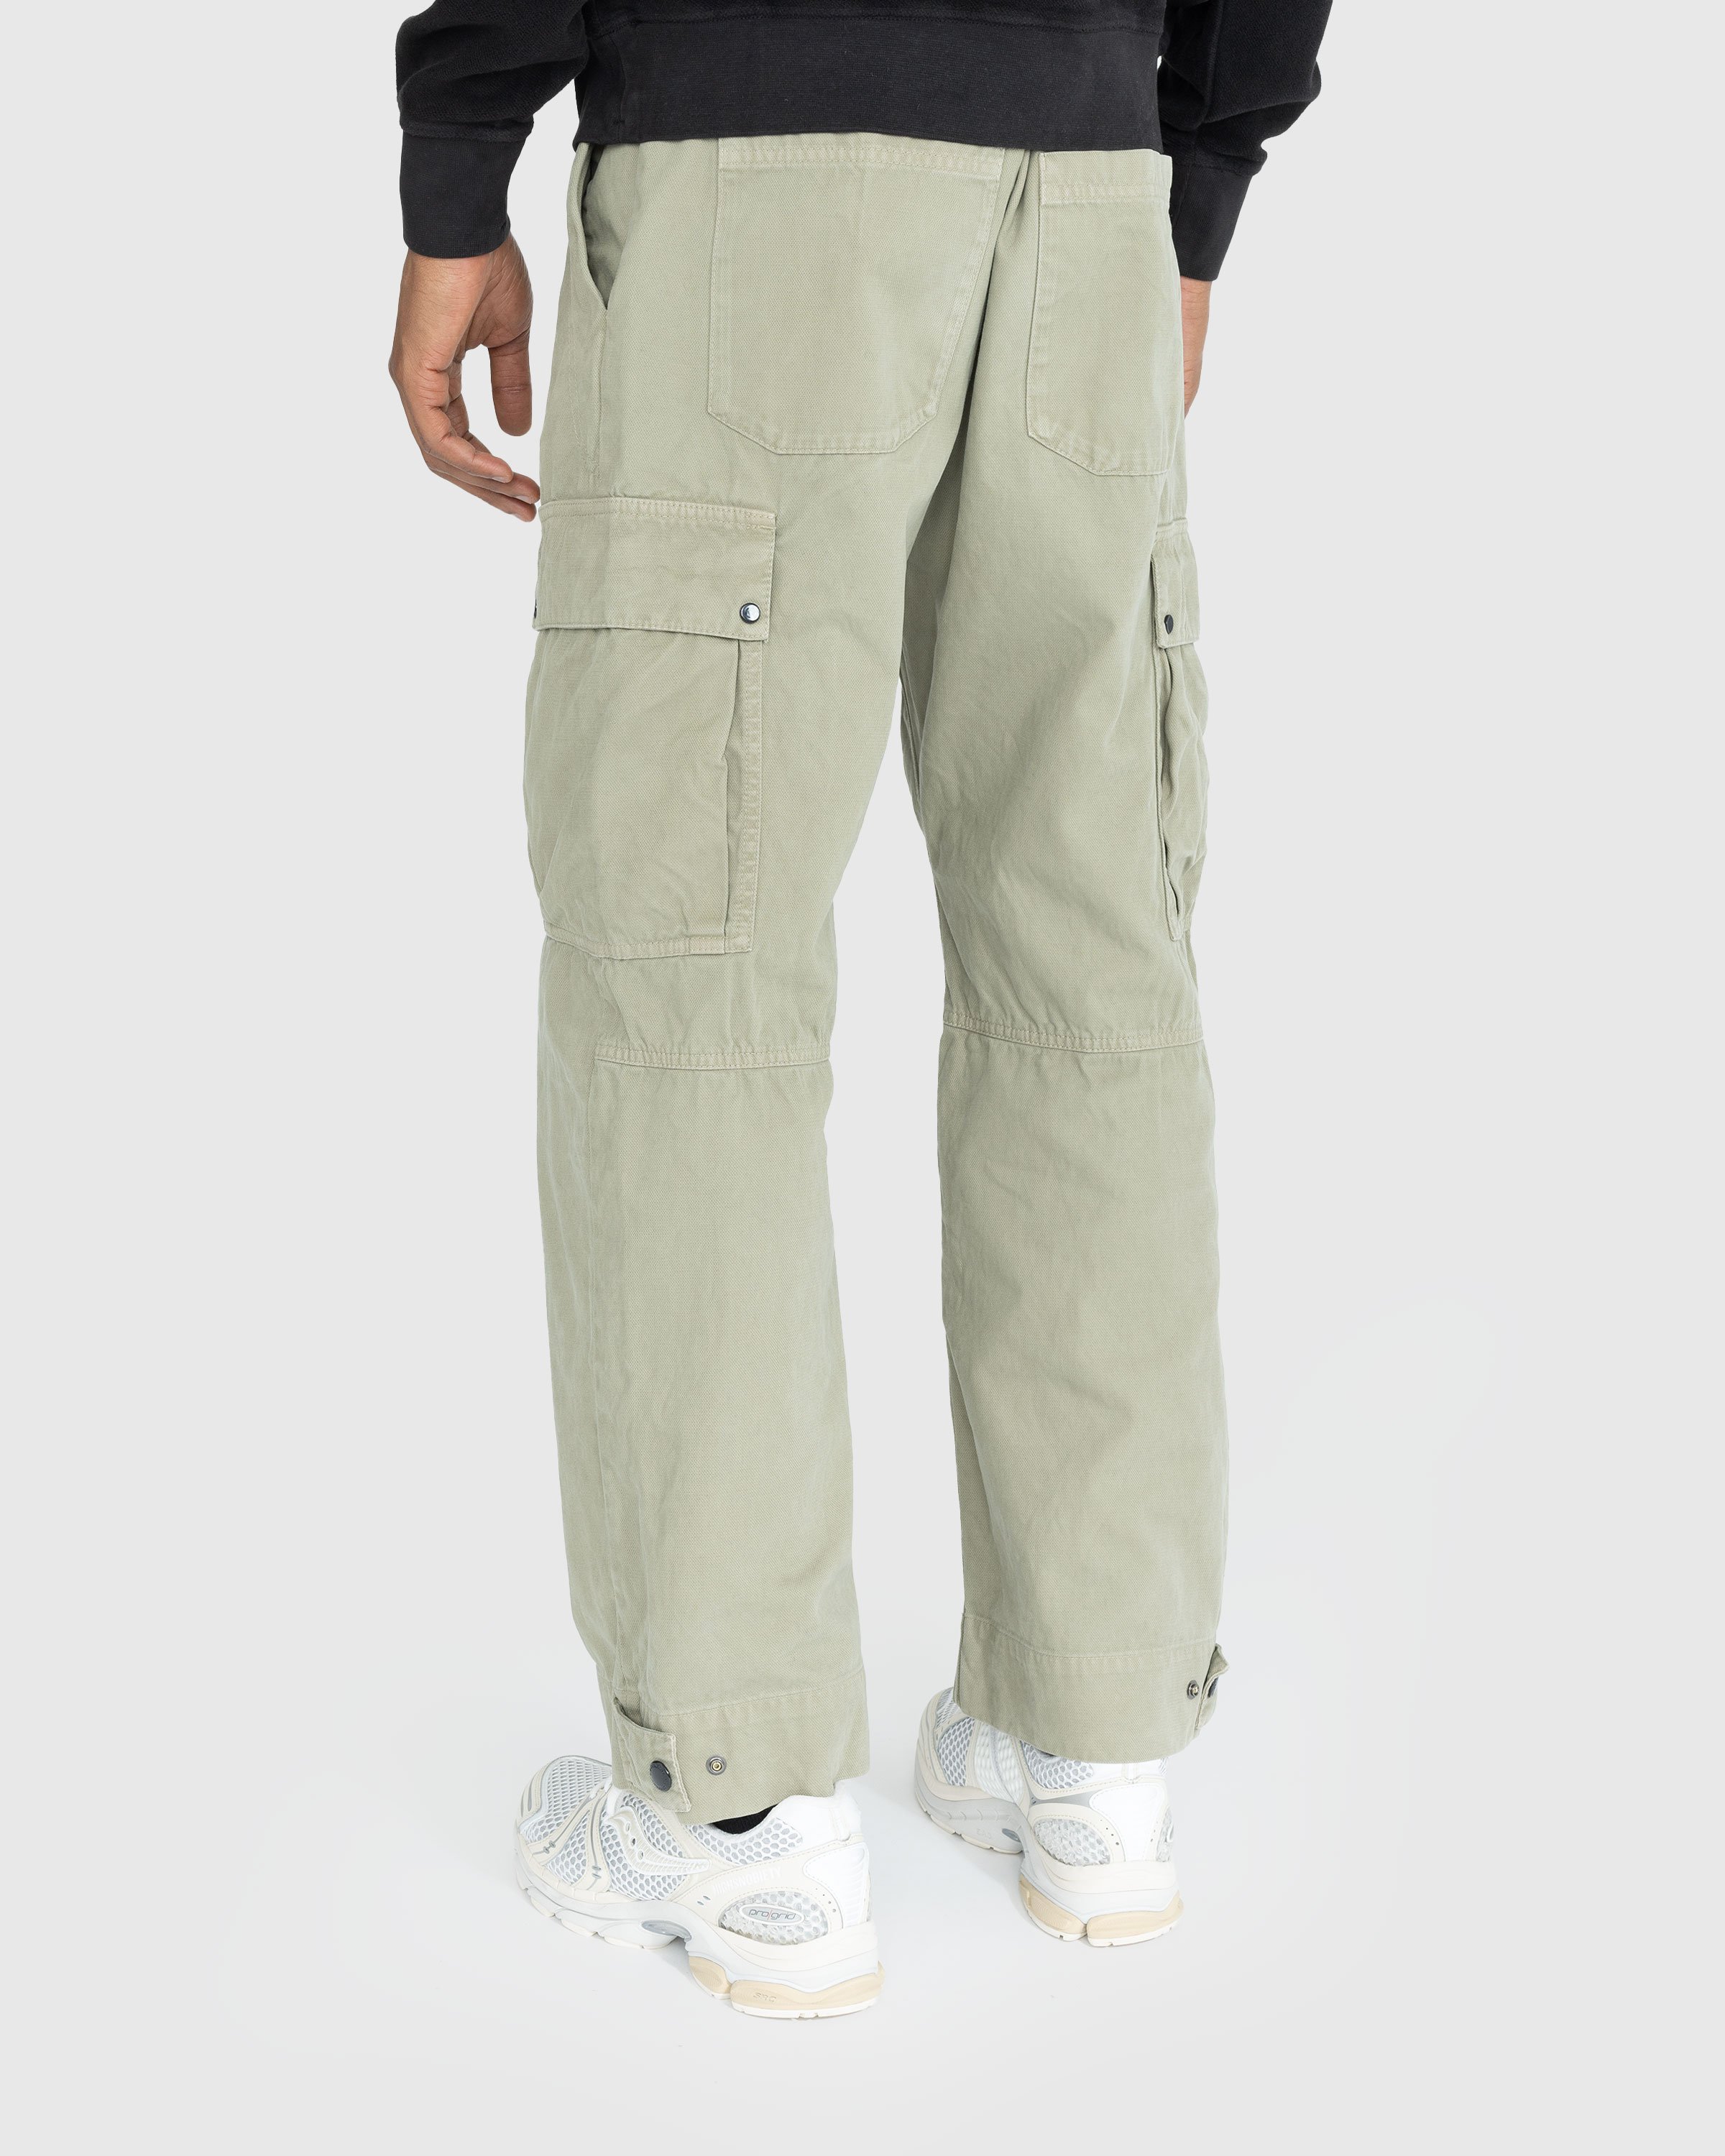 C.P. Company - Cargo Pant Silver Sage - Clothing - Green - Image 3